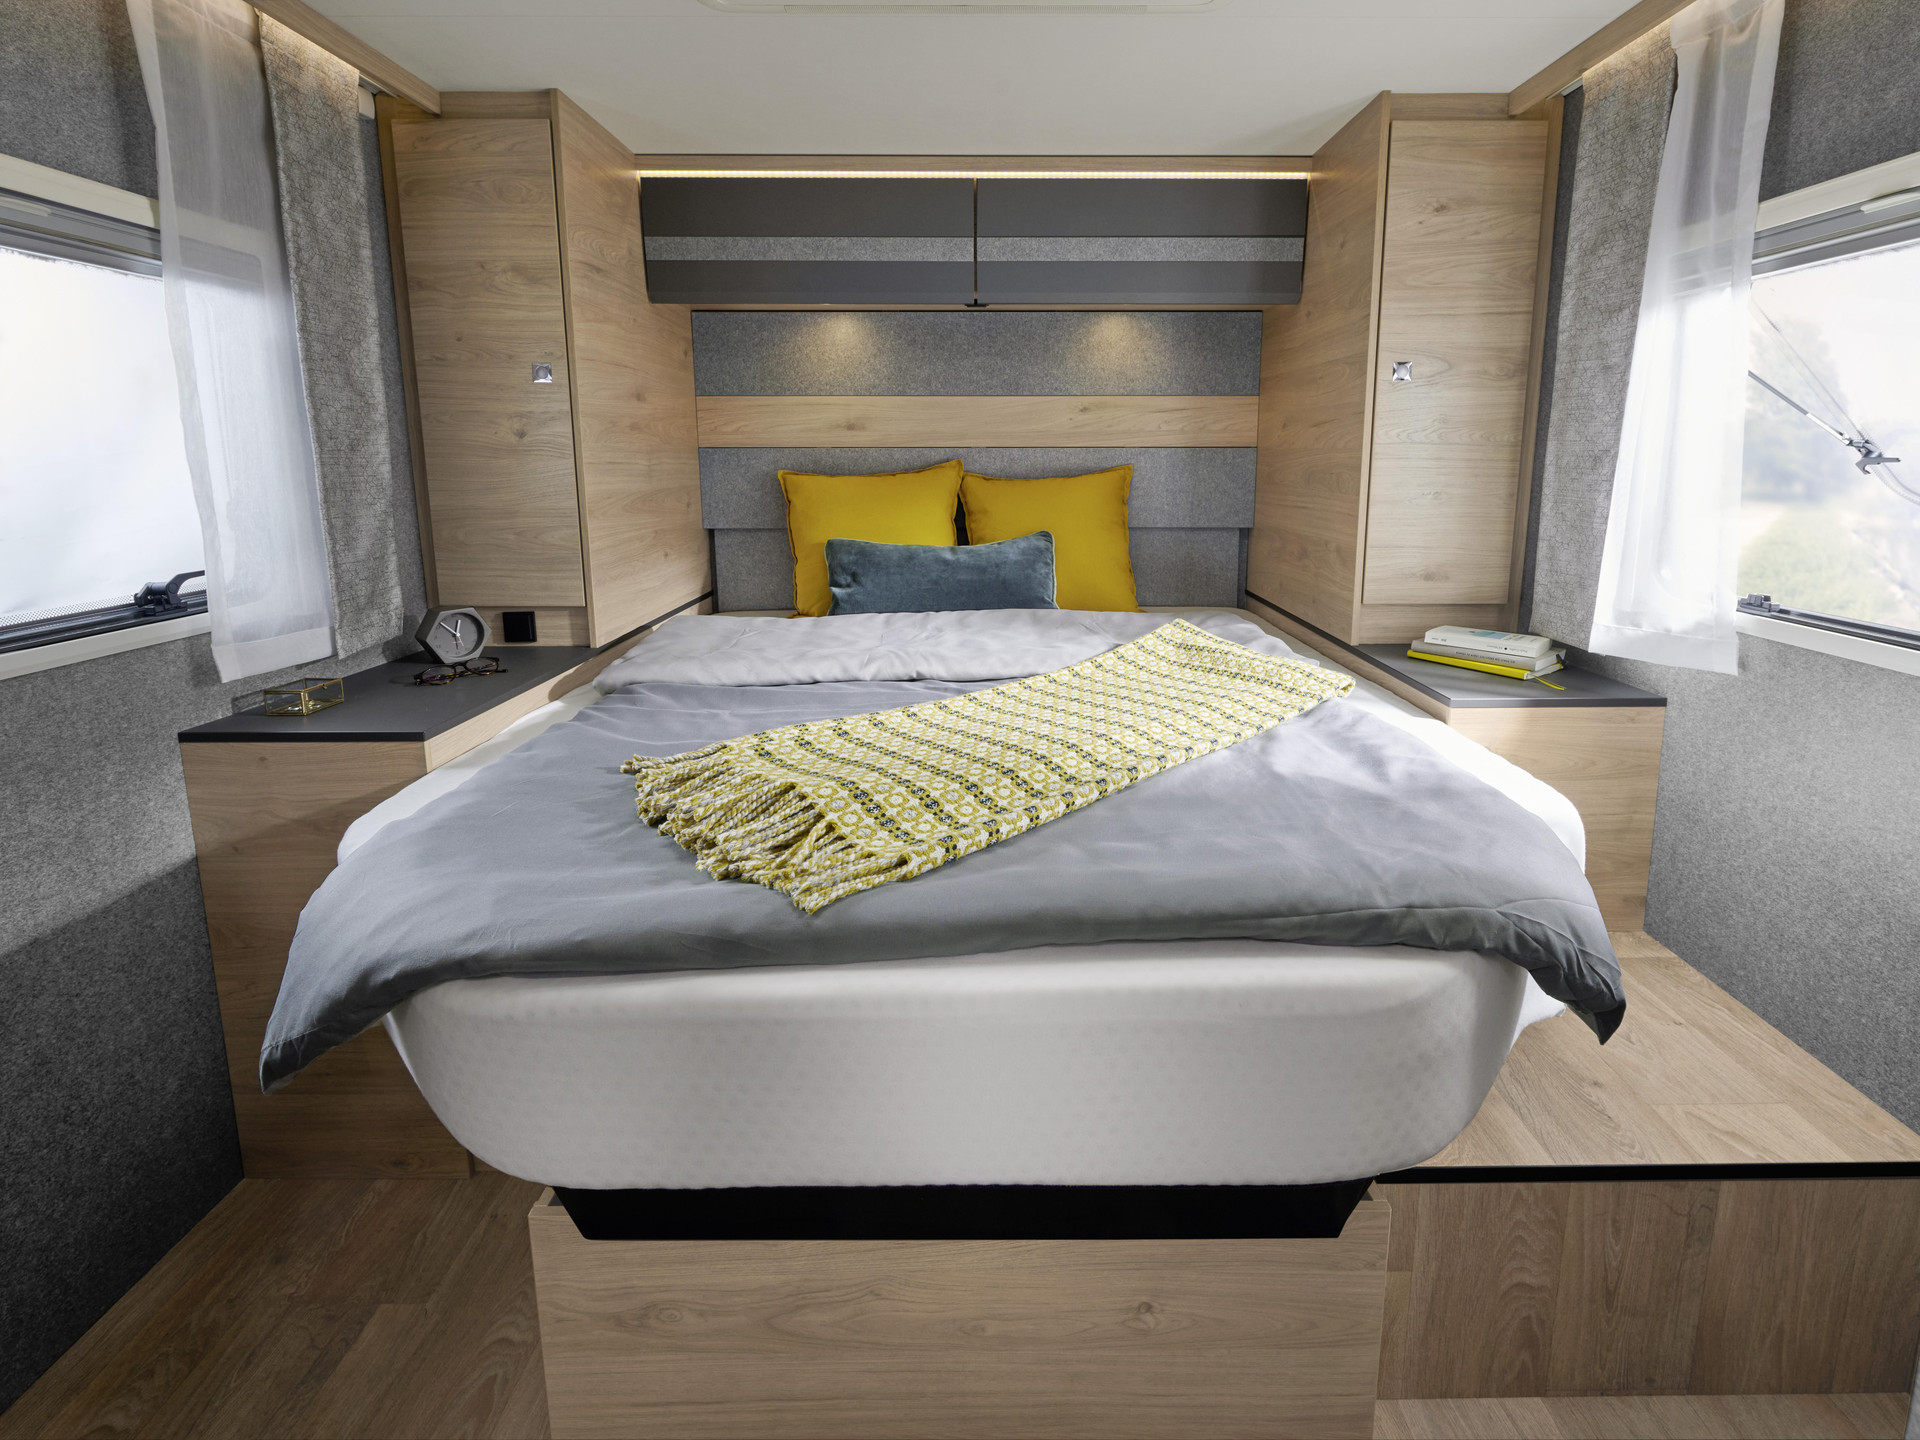 The 190 x 150 cm queen bed is height-adjustable as standard. Would you prefer more space in the rear garage or extra headroom in the bedroom? You can decide depending on how much cargo you need to load.